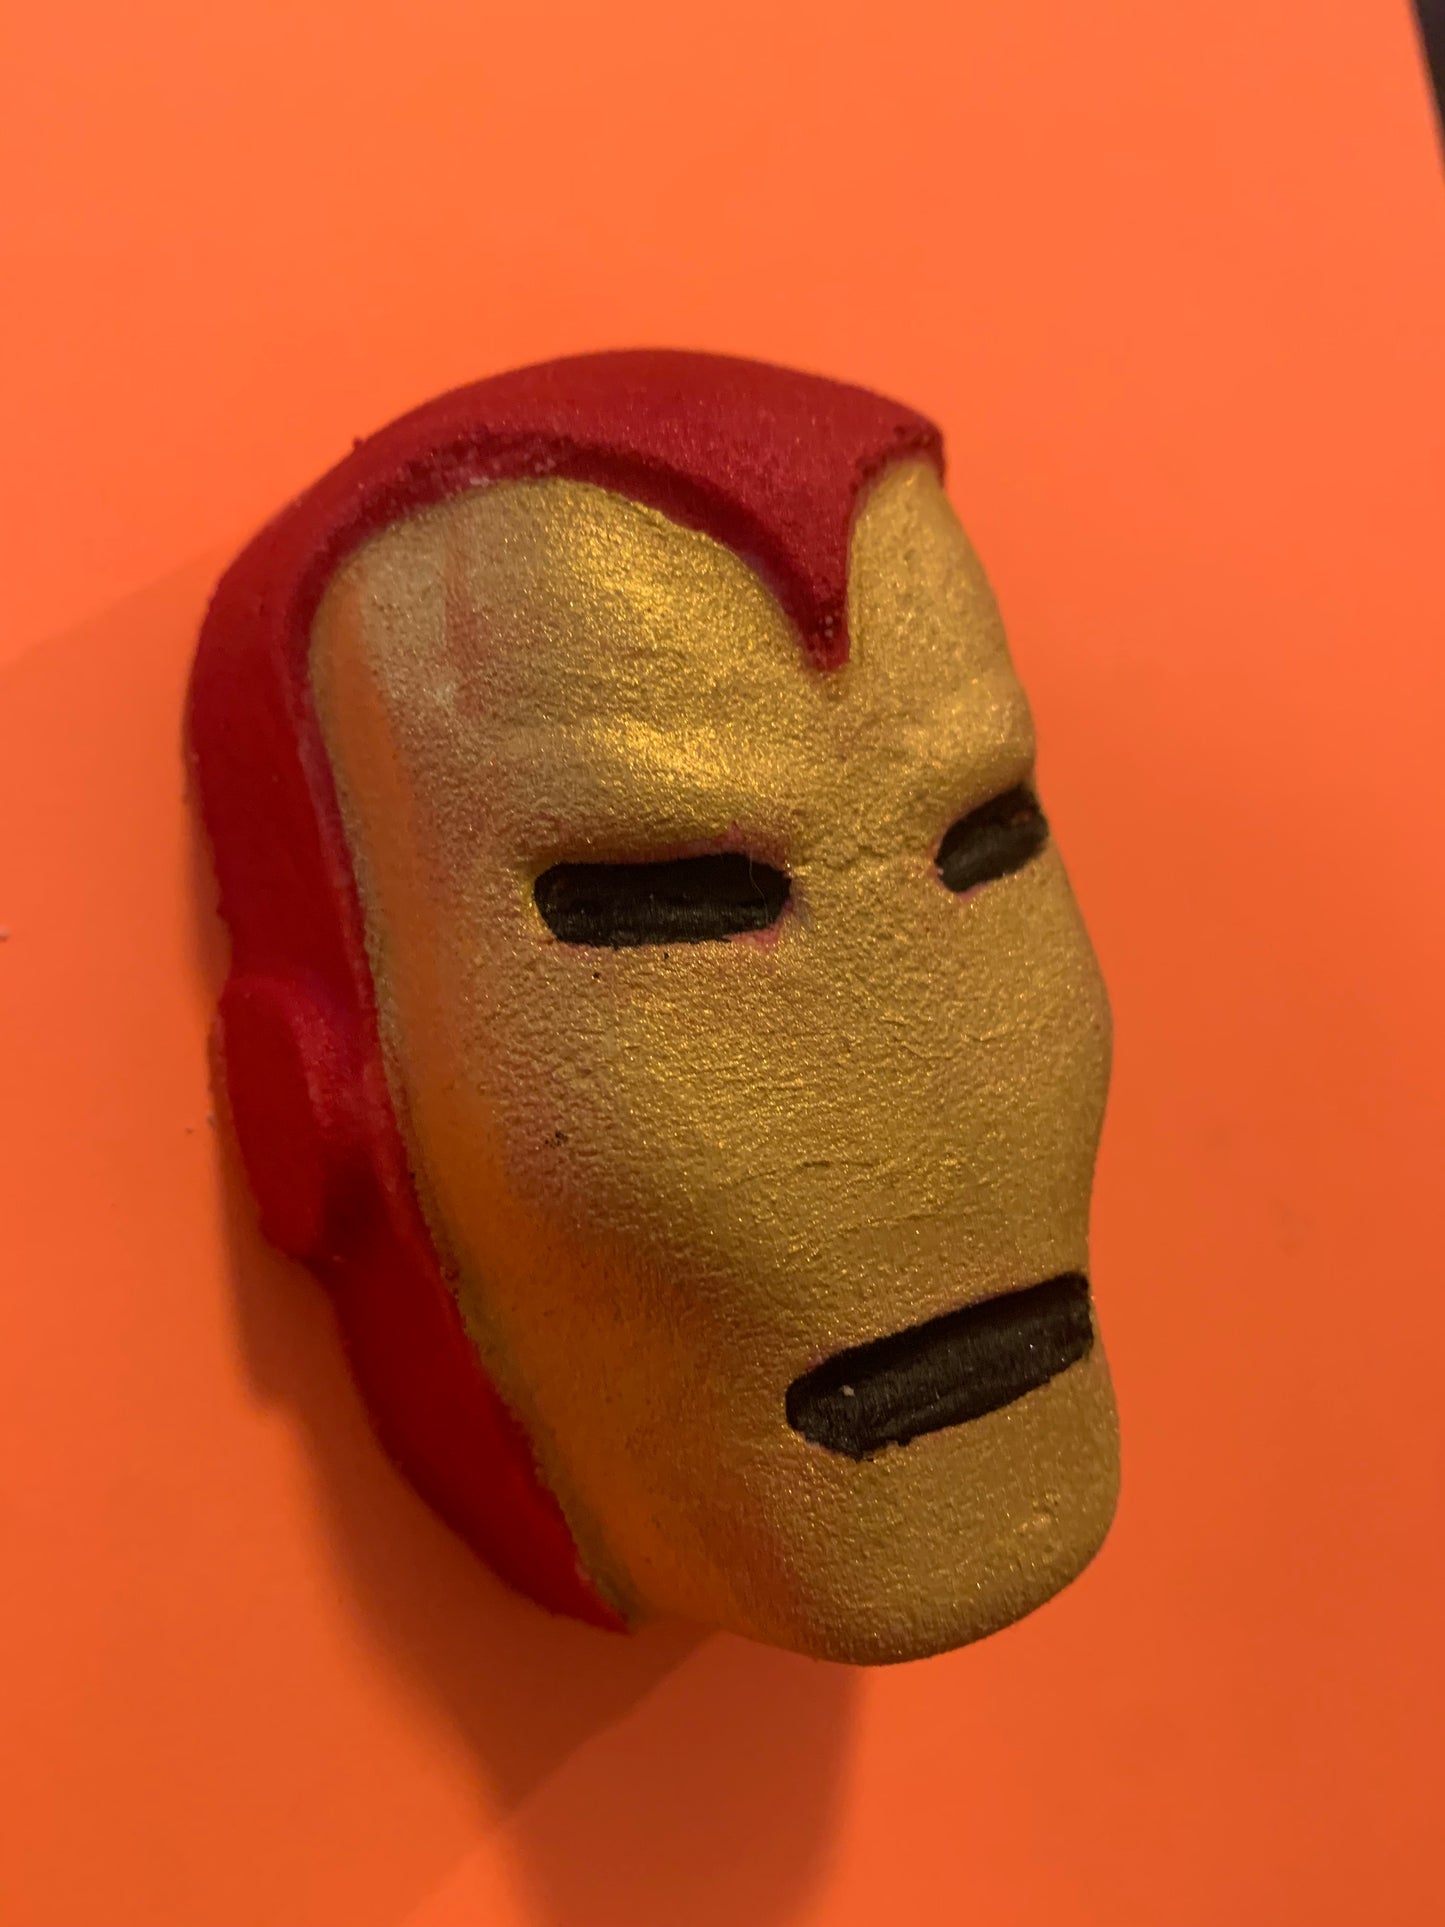 Masked Suited Man of Iron Hero Avenge Character Bath Bomb with surprise inside